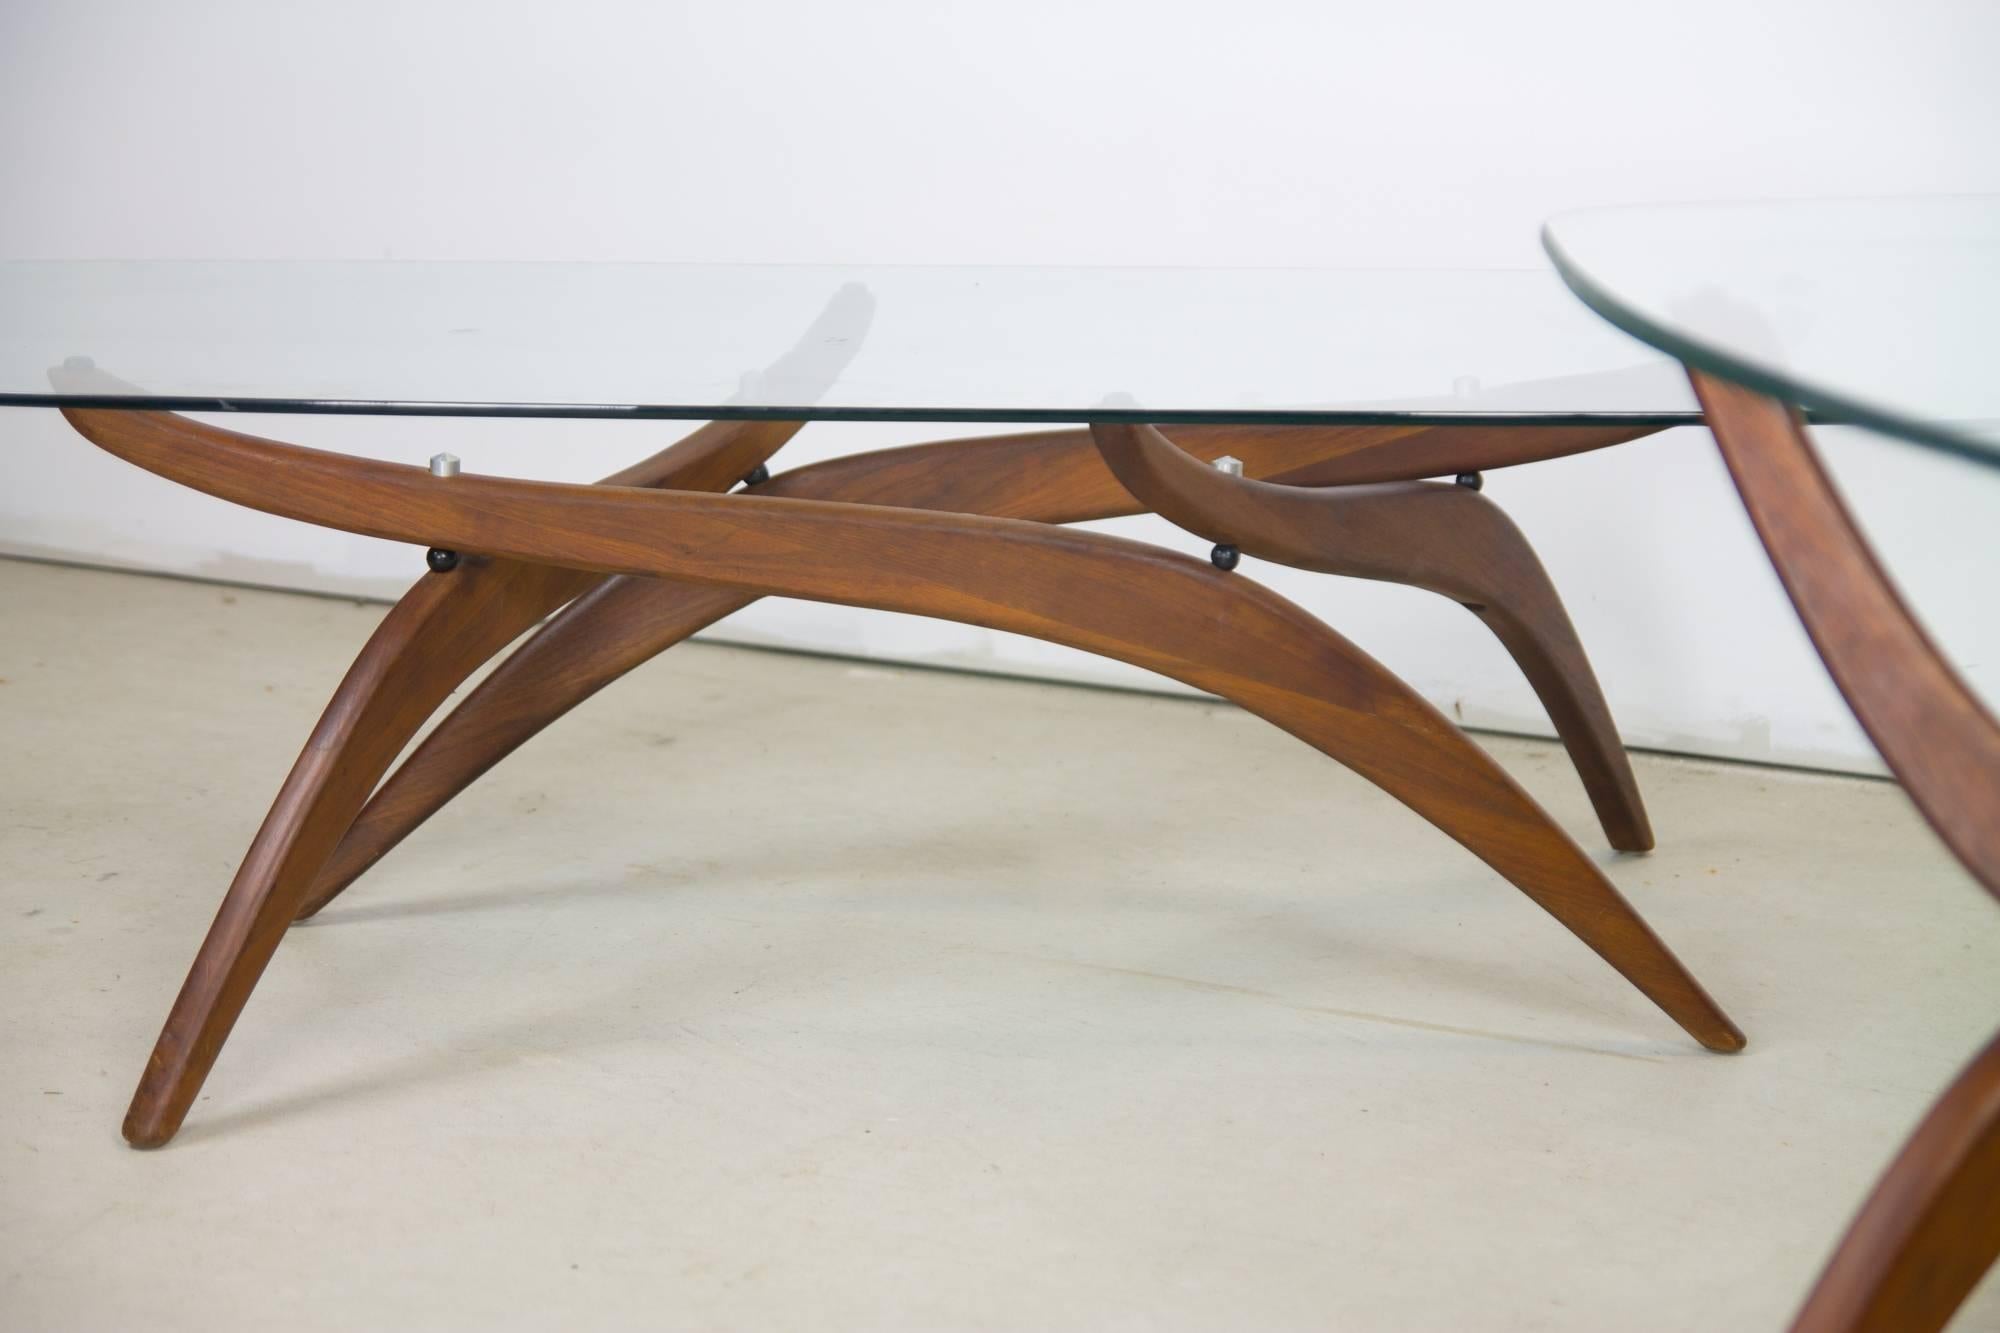 Elegant set of sculpted walnut tables by Forest Wilson with rounded rectangular 1/2 inch glass tops. One cocktail table and two side tables. Side table dimensions are H 21